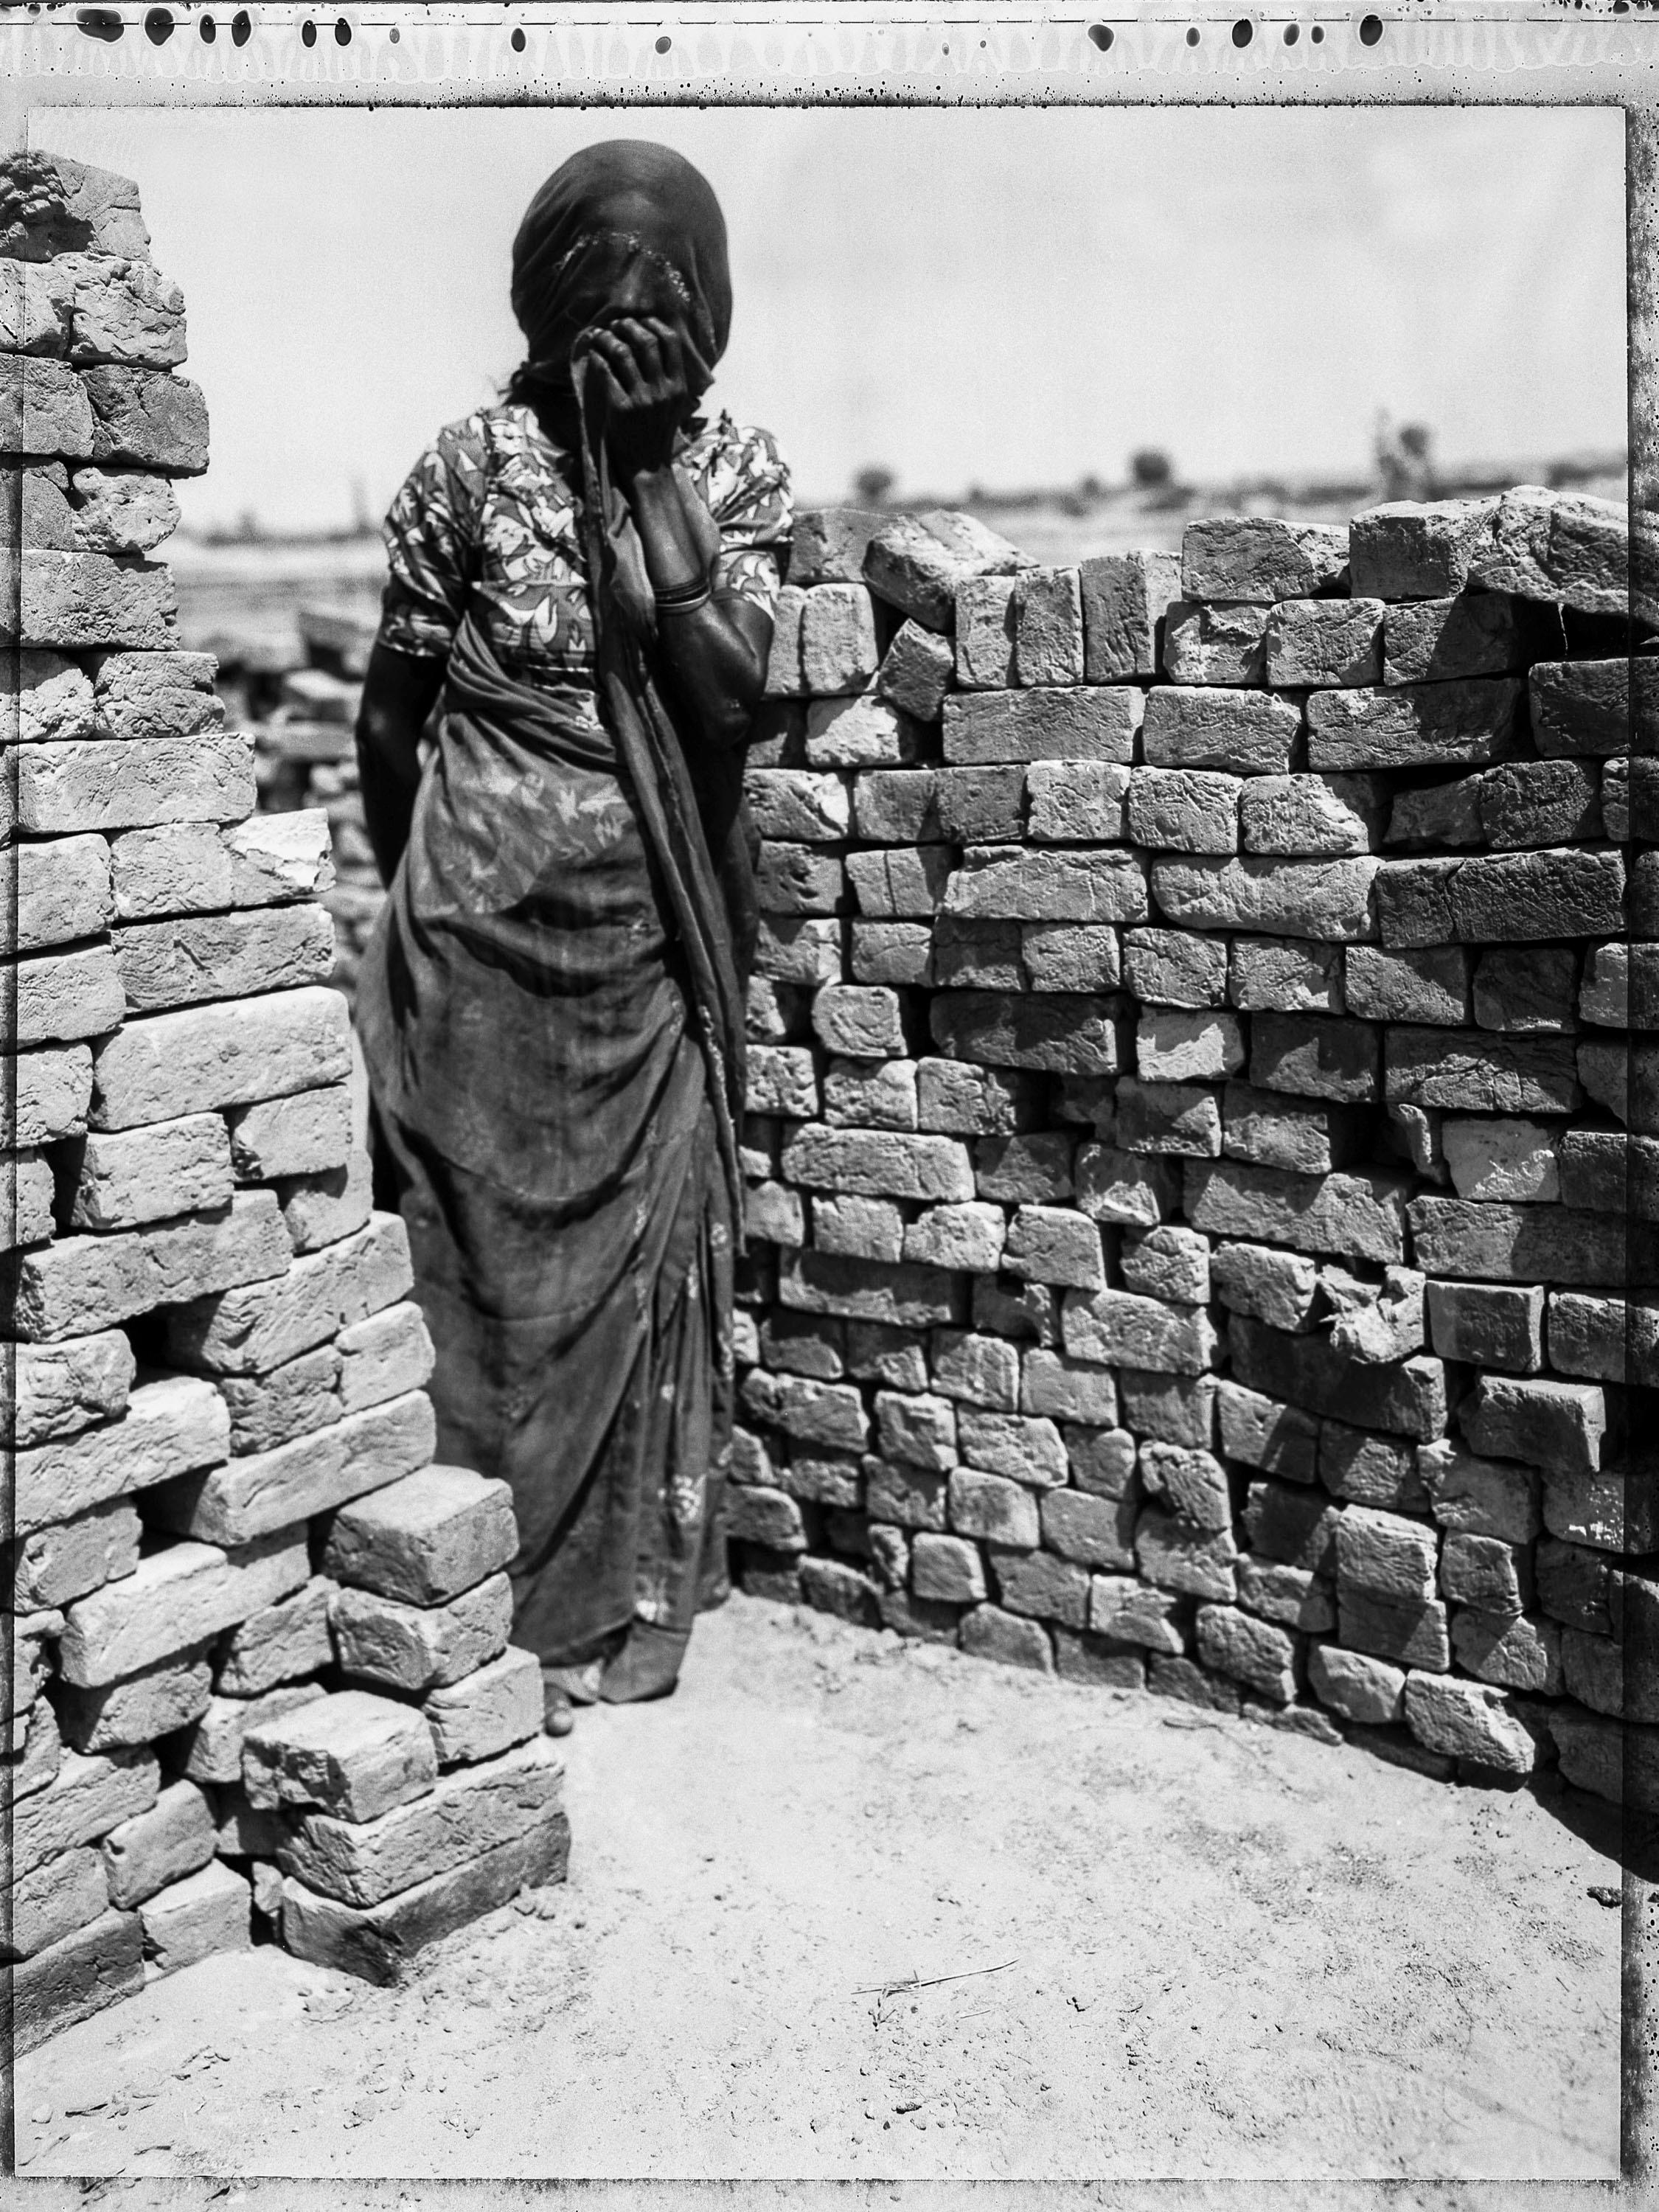 Indian woman in a bricksfactory - Rajastan - India (from  Indian Stills series)